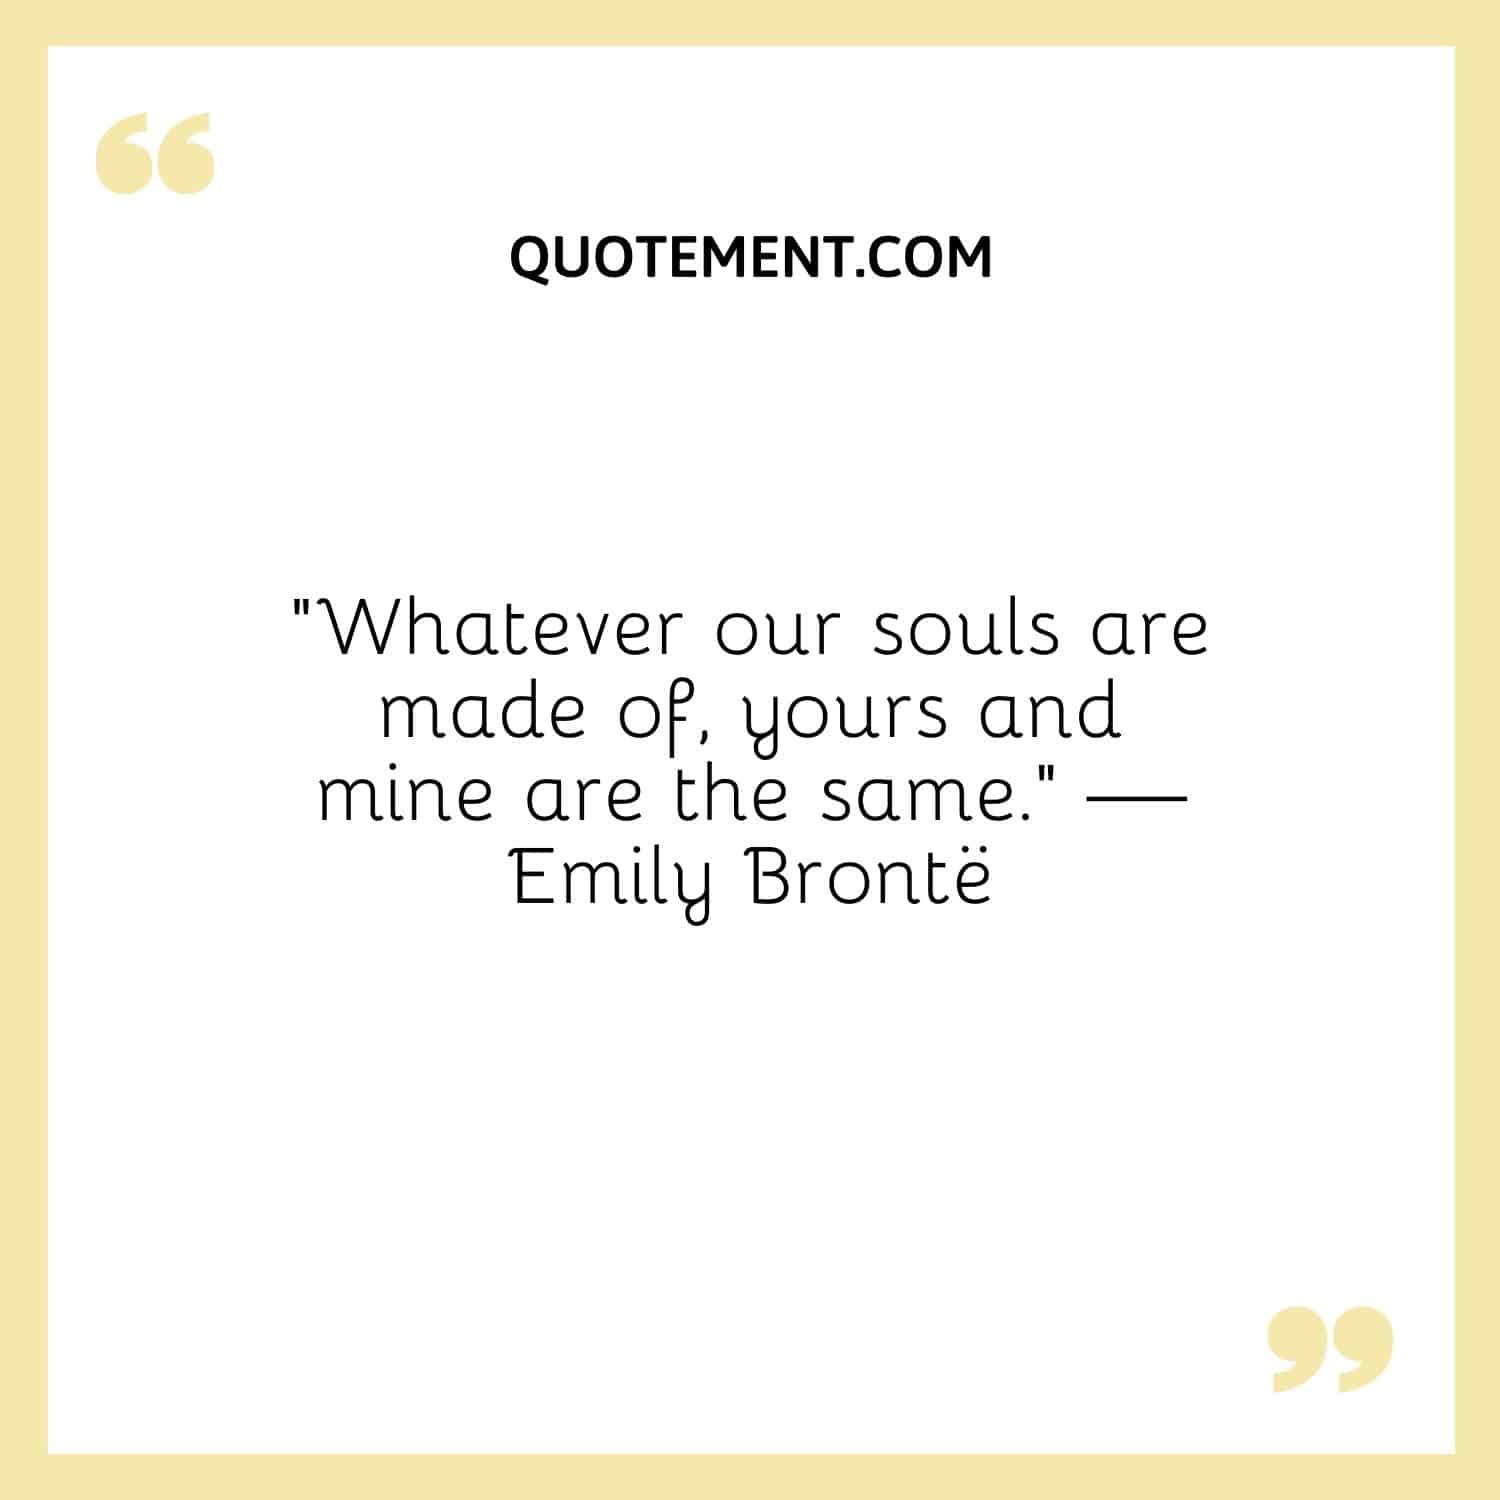 “Whatever our souls are made of, yours and mine are the same.” — Emily Brontë